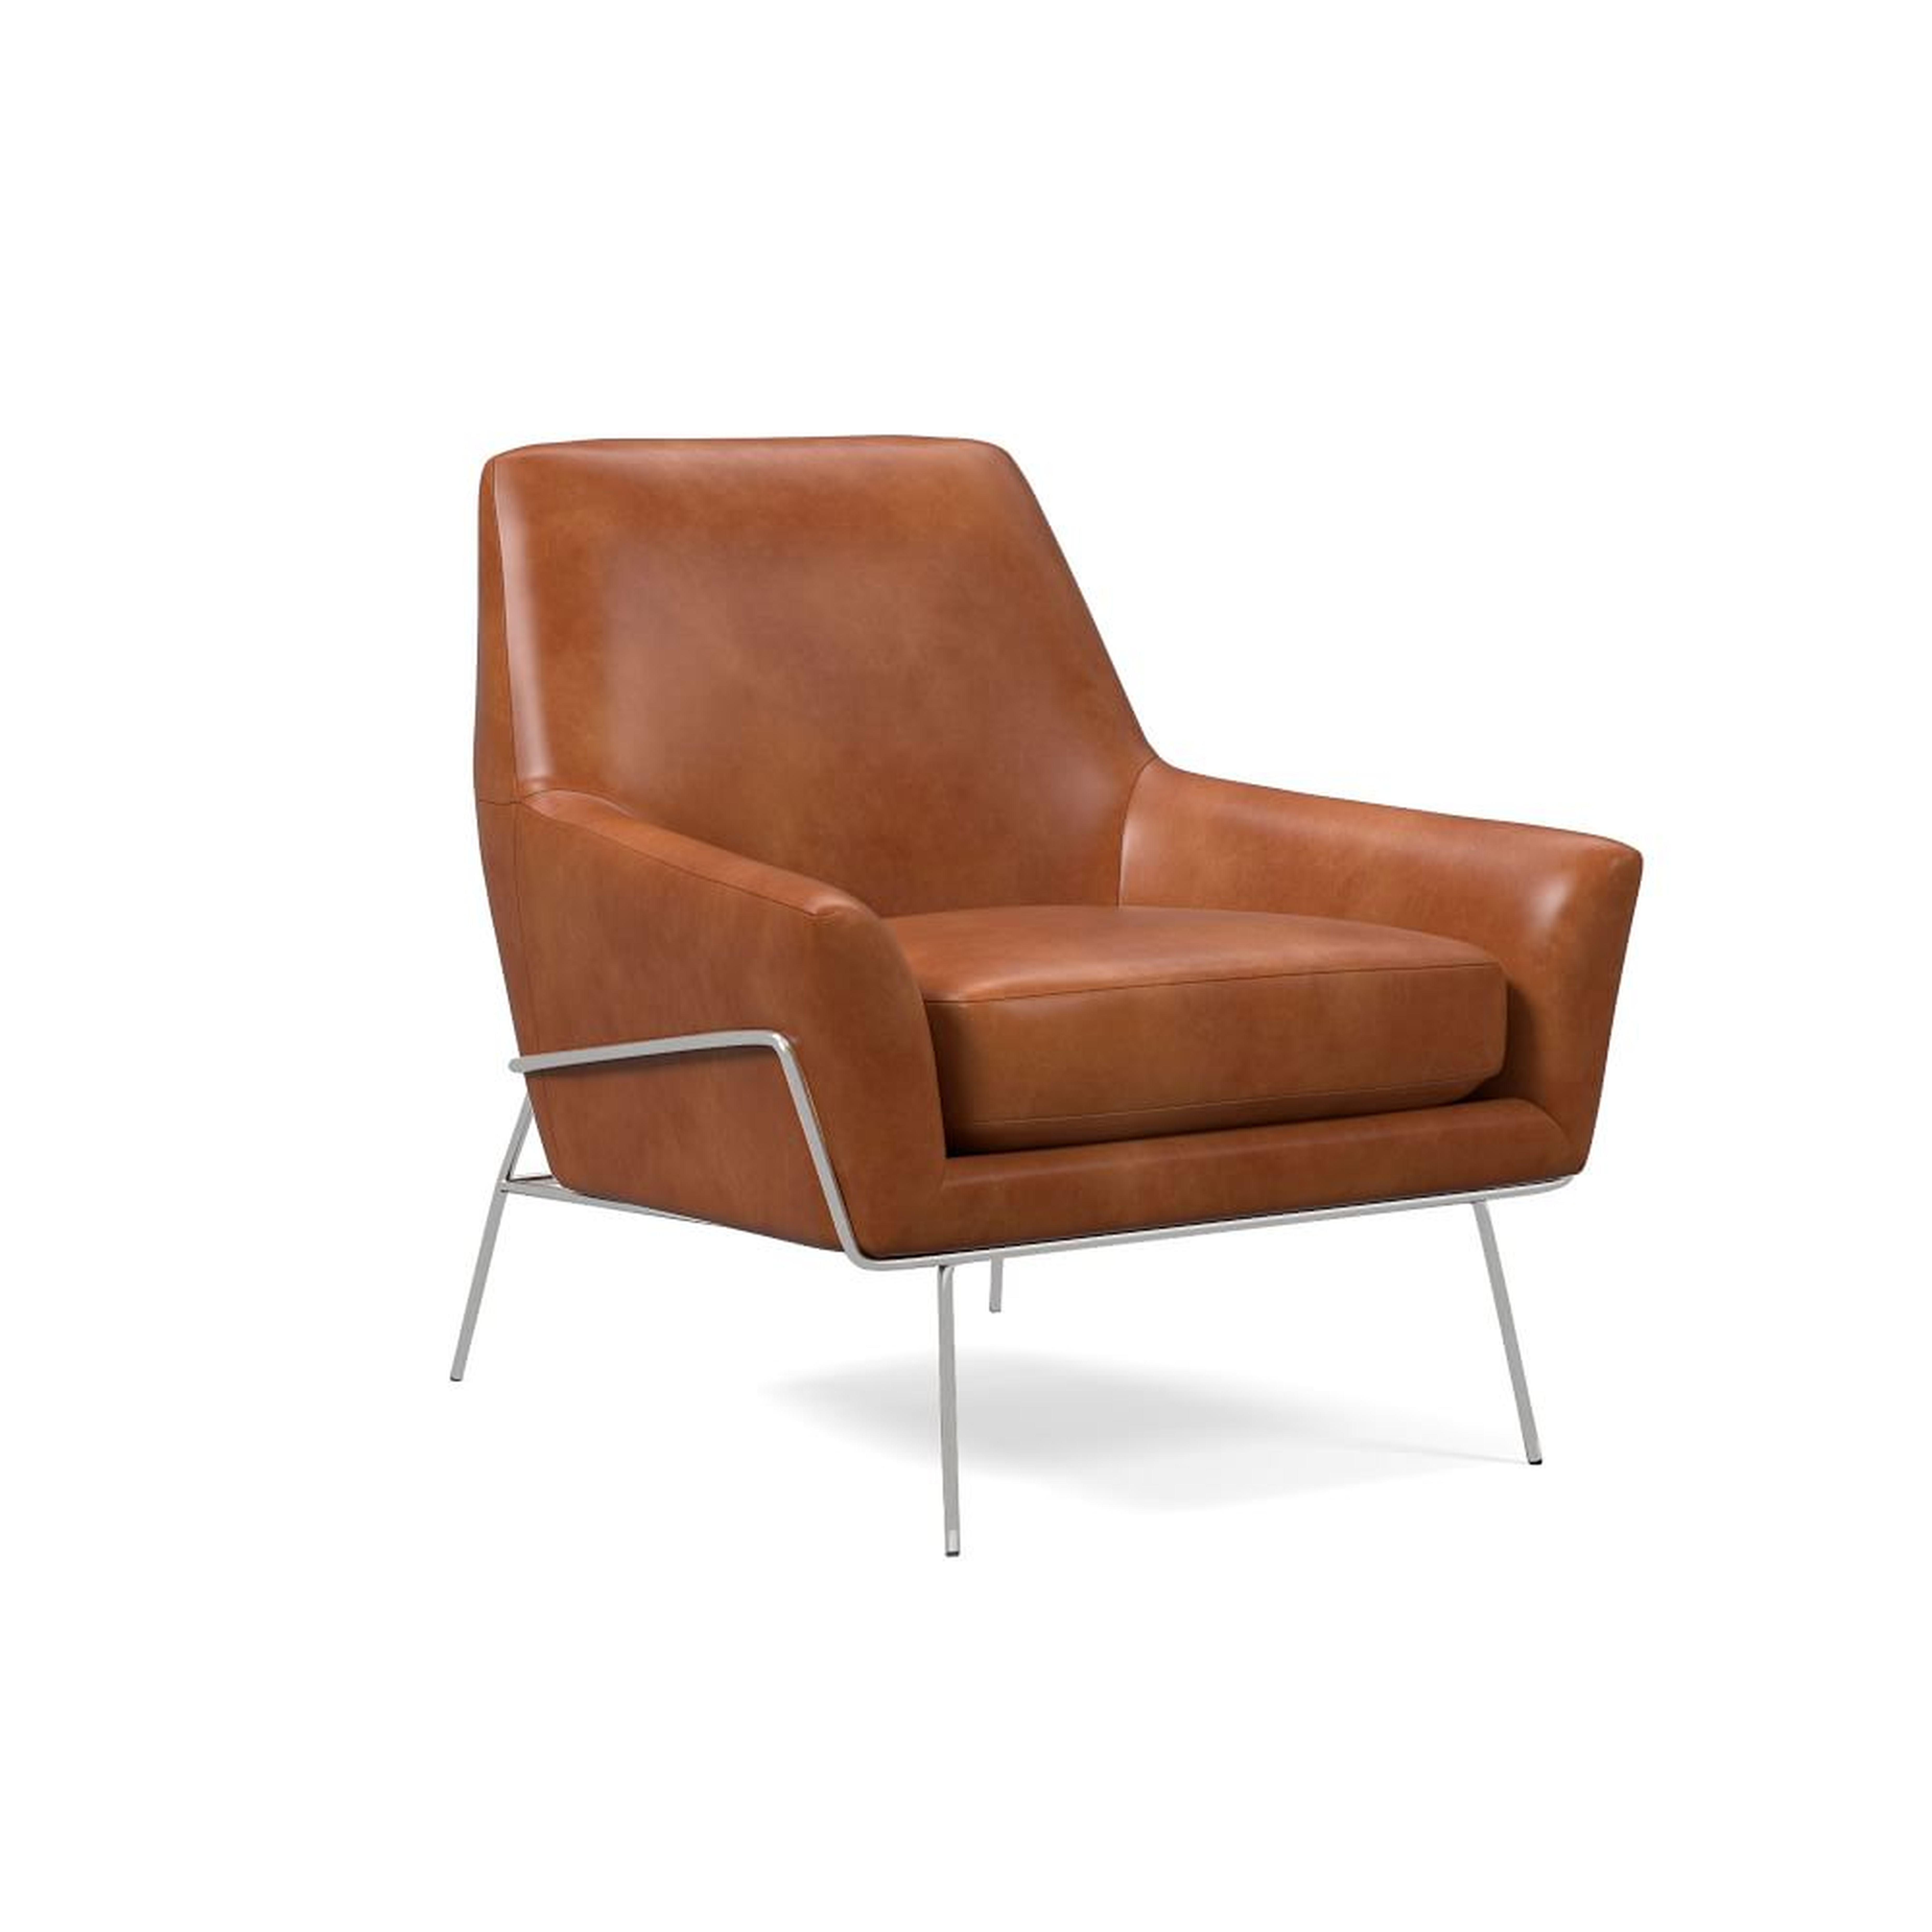 Lucas Wire Base Chair, Poly, Saddle Leather, Nut, Polished Nickel - West Elm